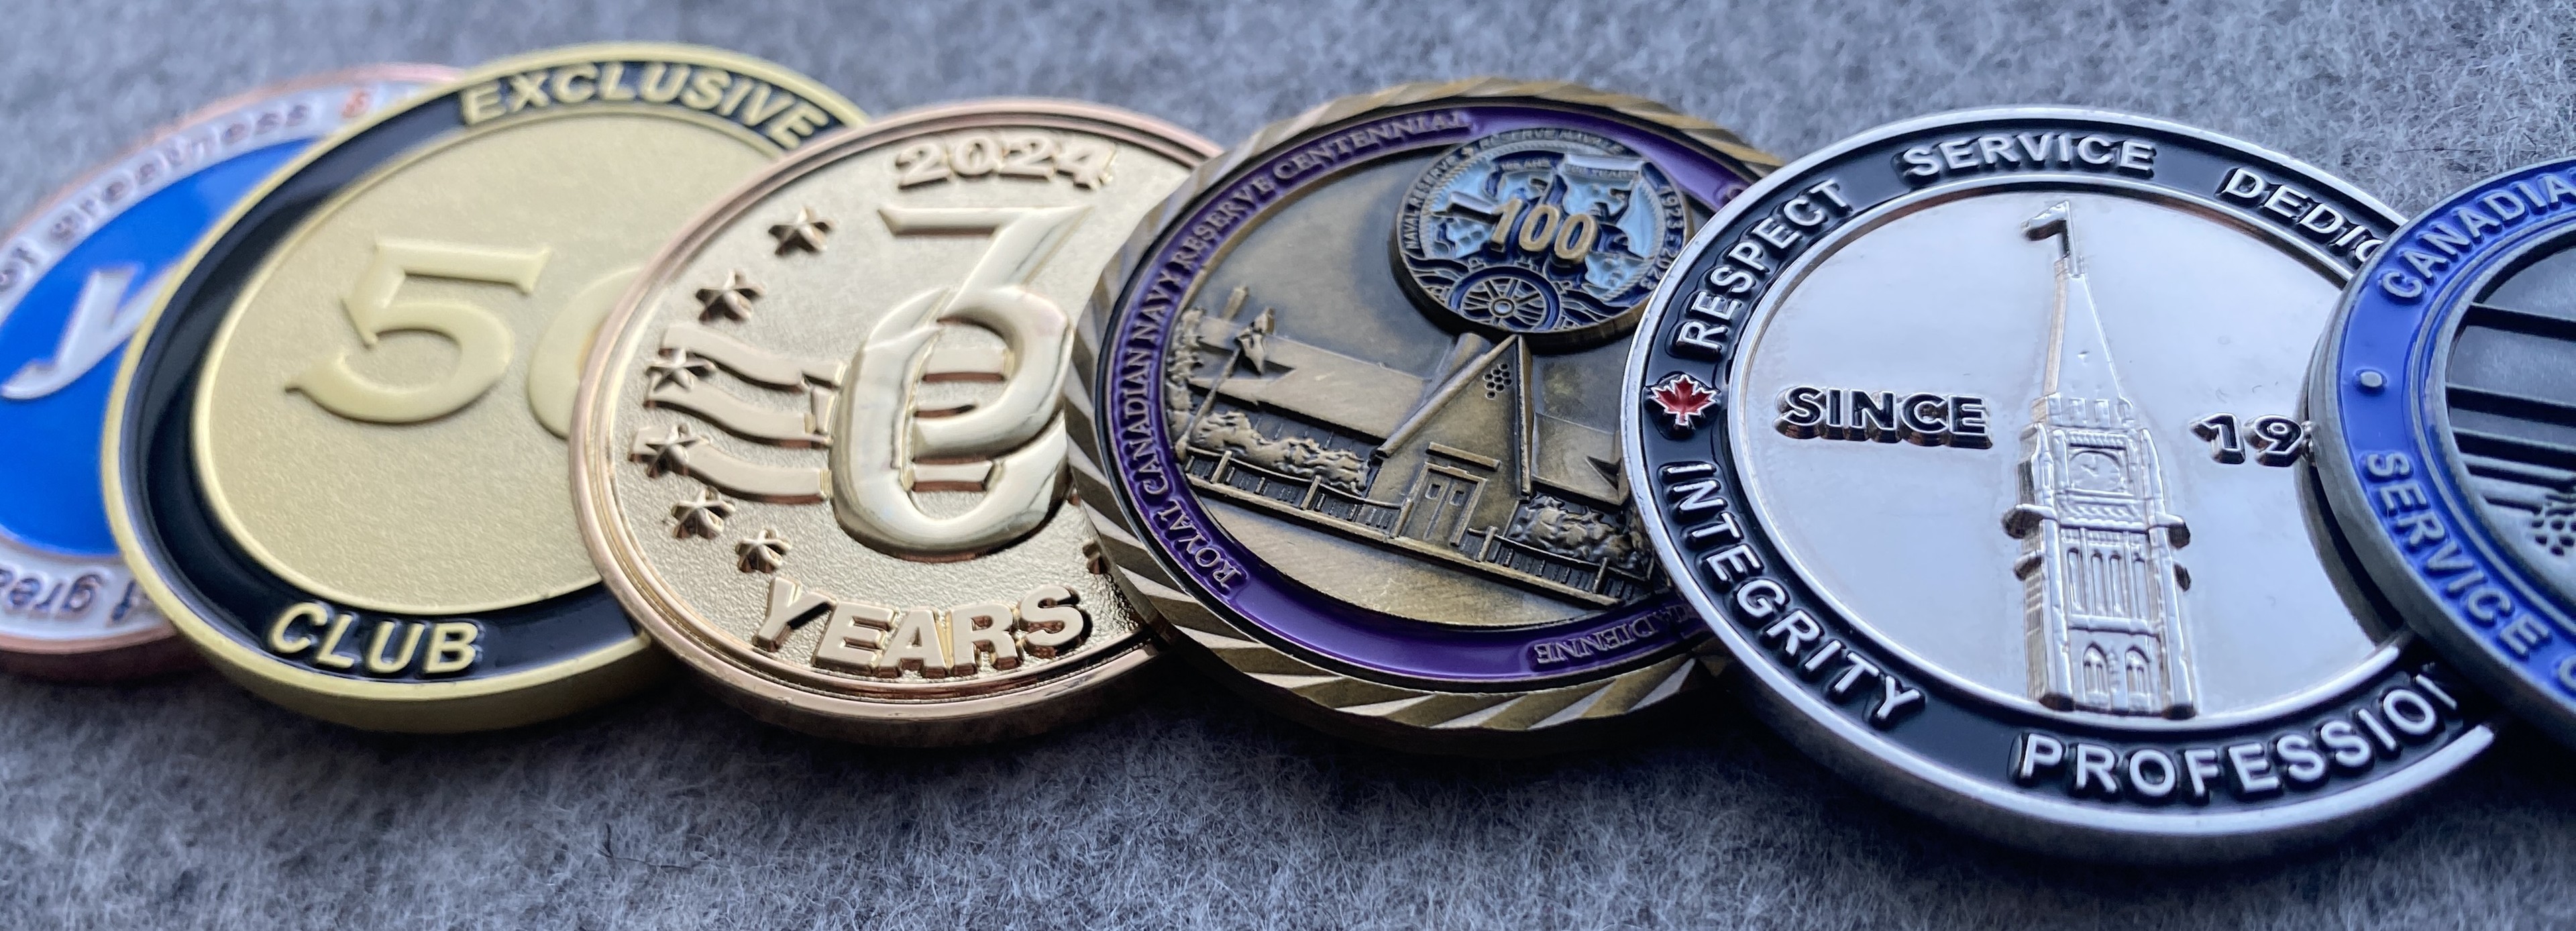 a line of custom made challenge coins with numbers